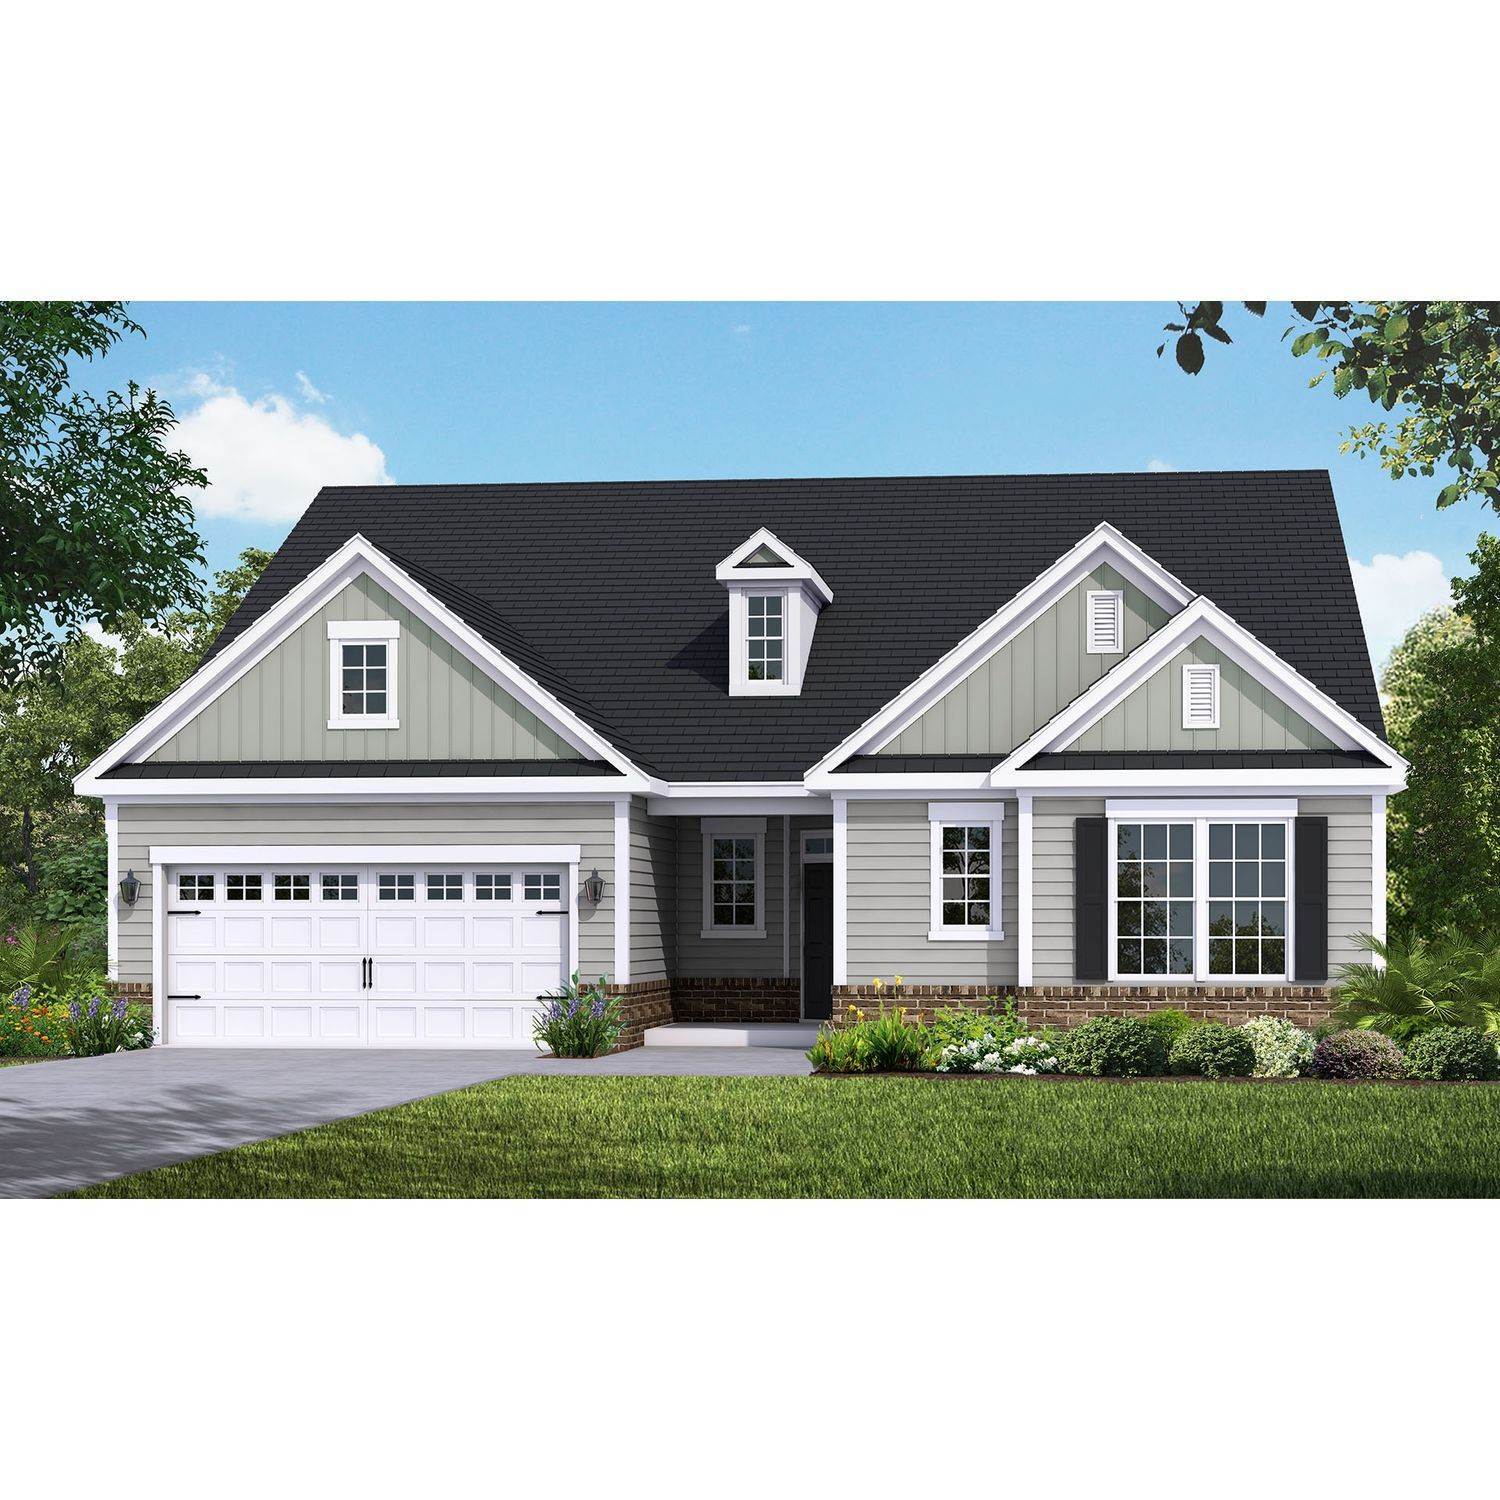 Single Family for Sale at Calabash, NC 28467